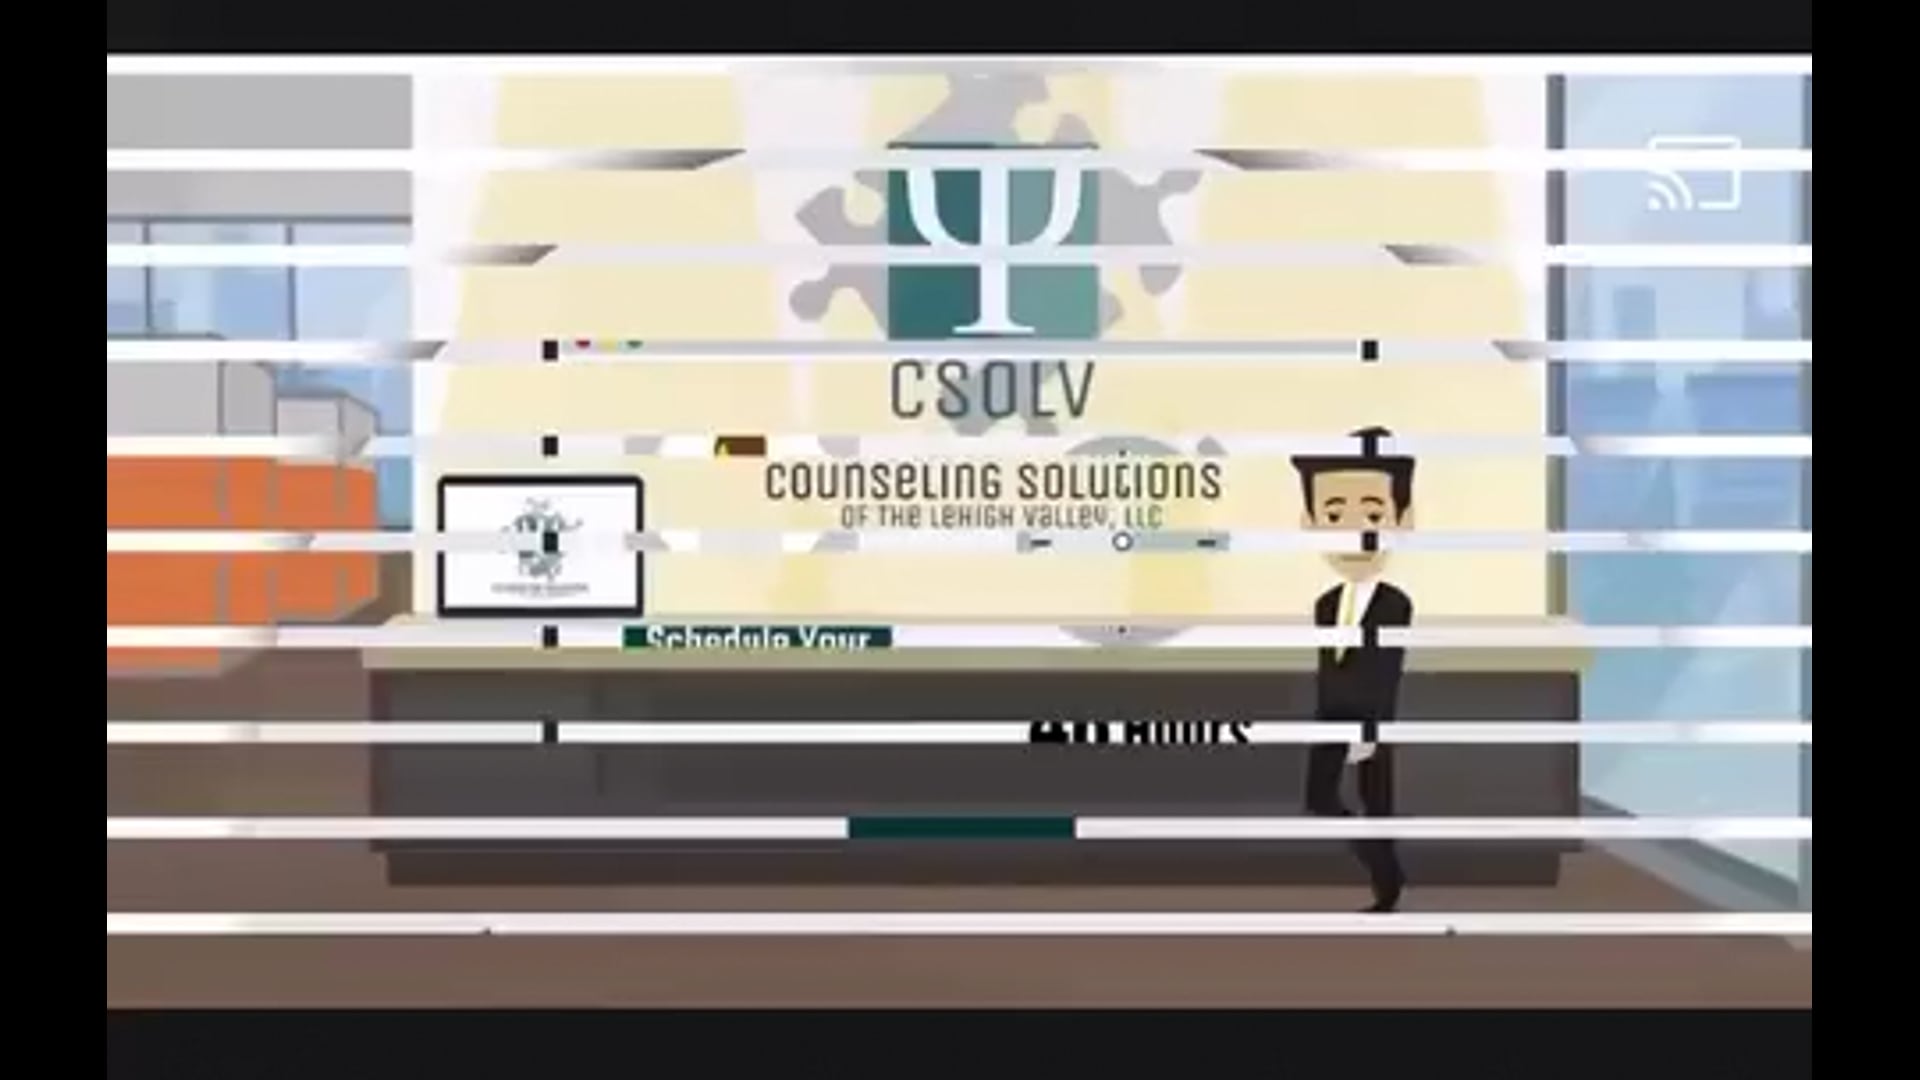 Counseling Solutions LV